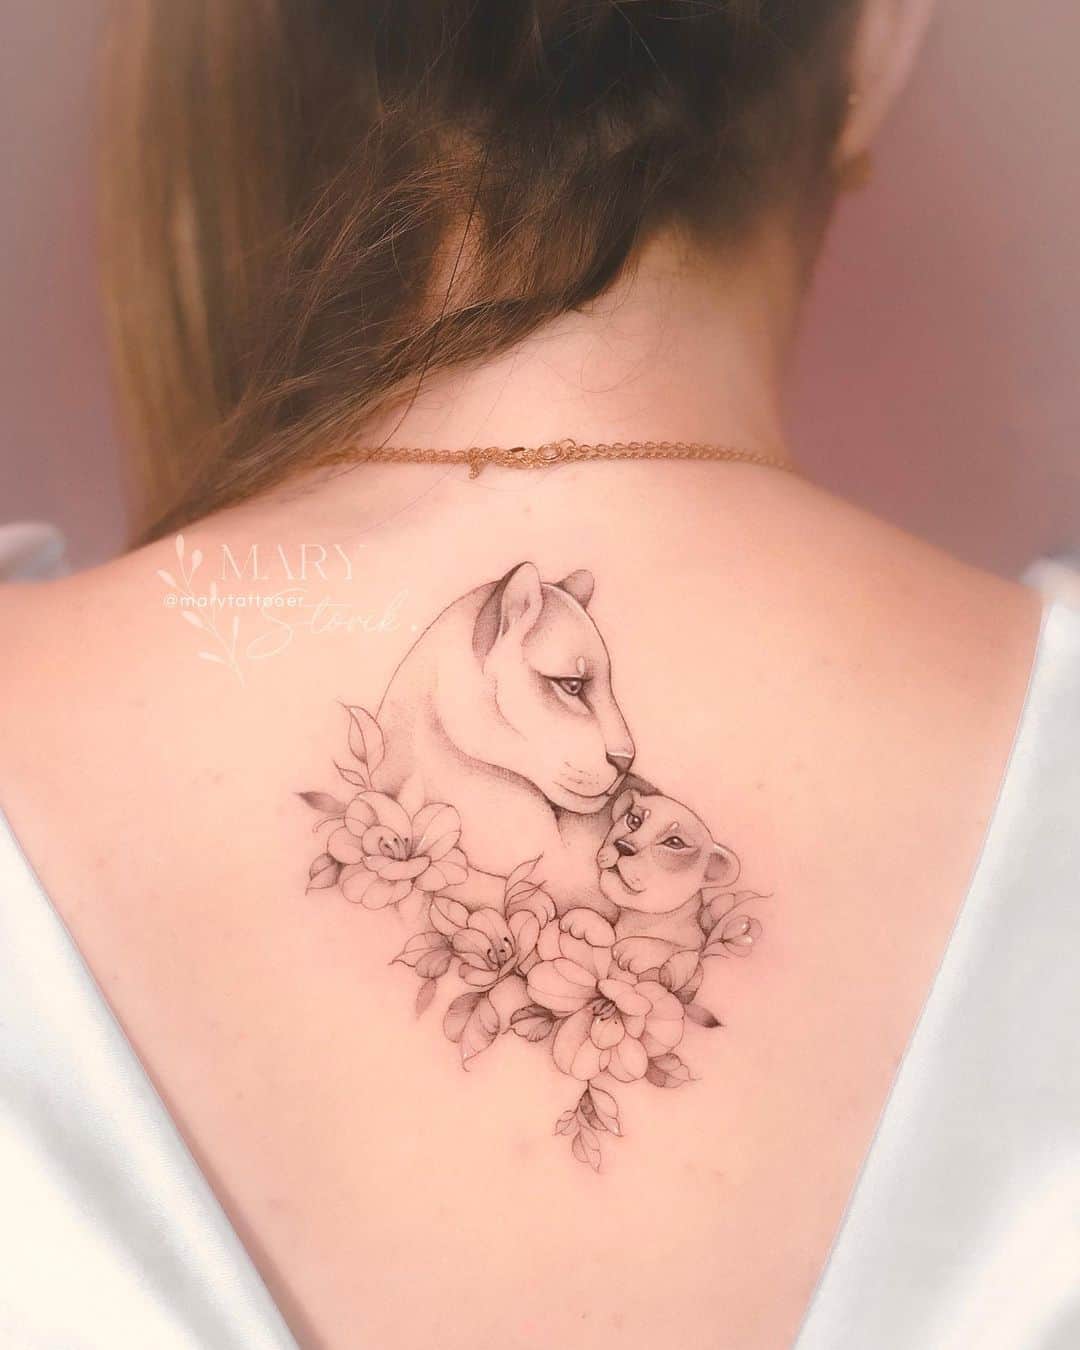 Lioness and cub tattoo with flower by marytattooer